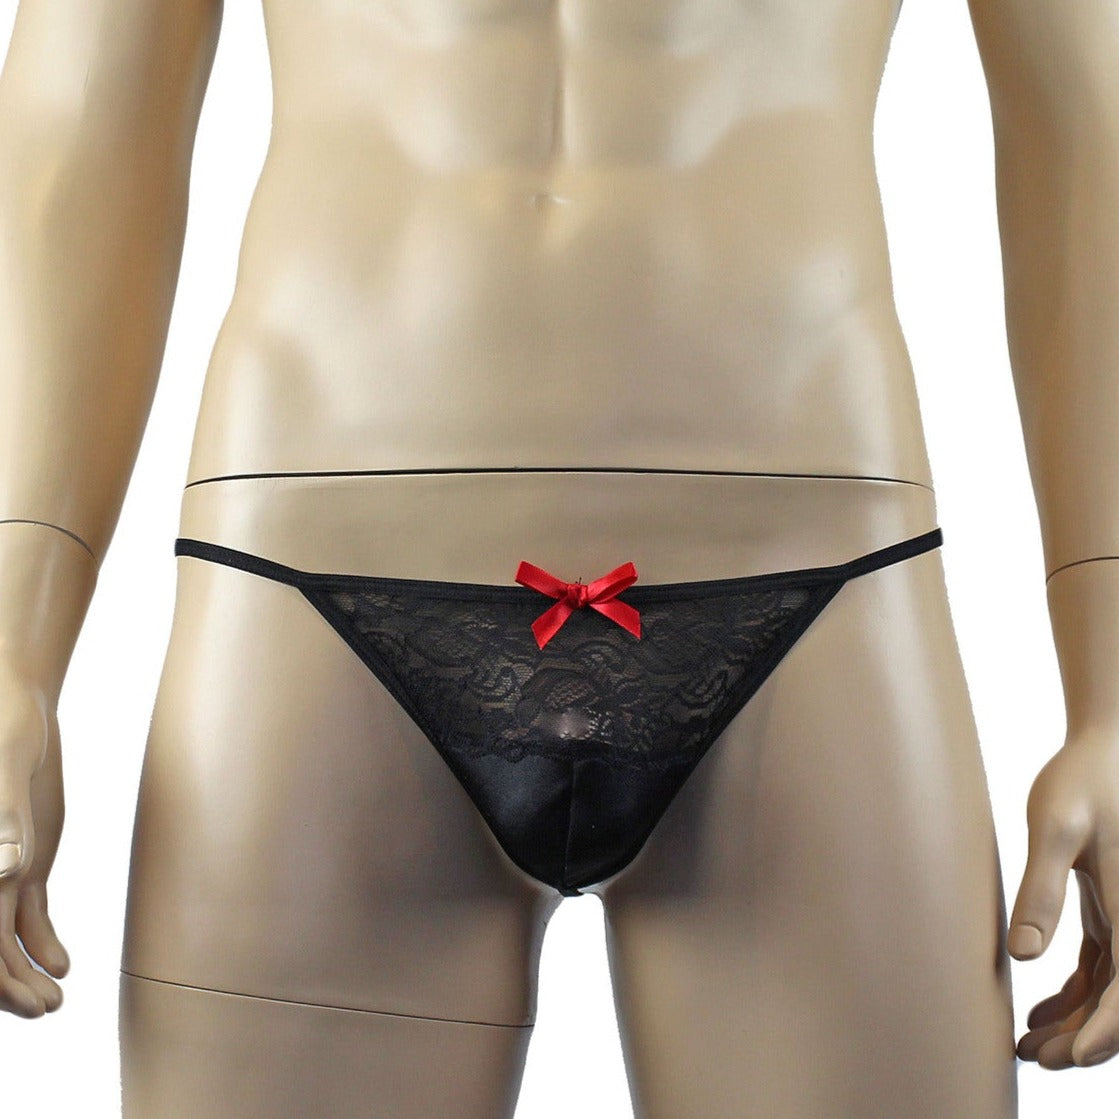 Mens Joanne Lacey G string with Bow Black and Black Lace